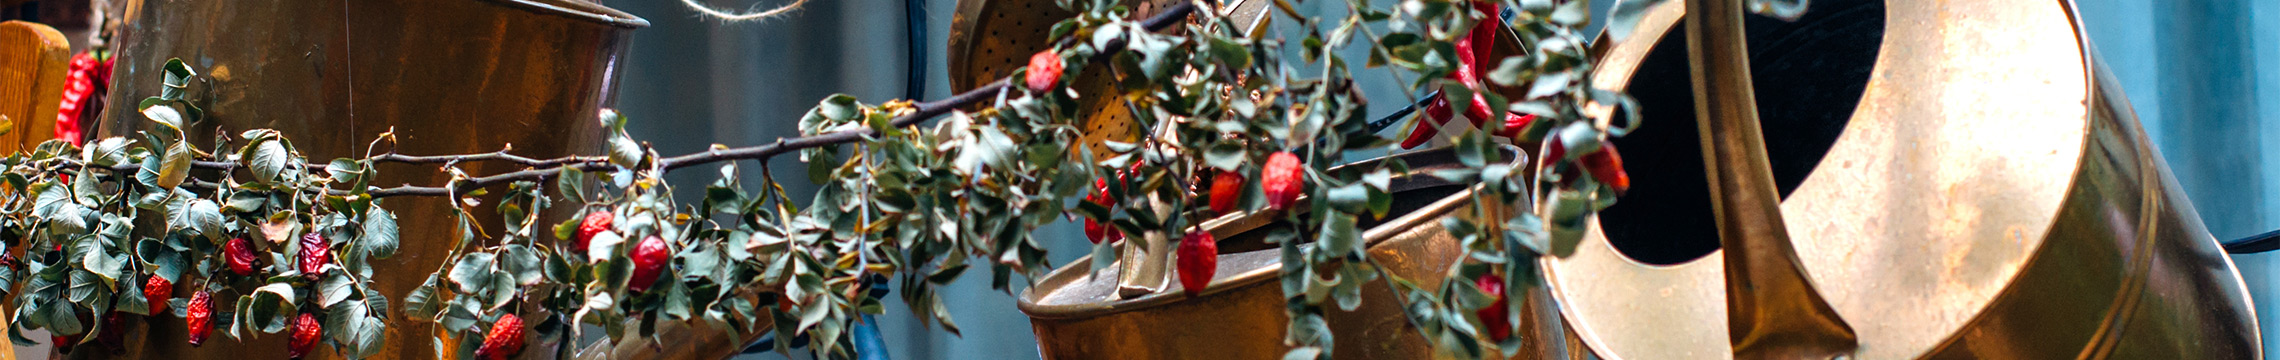 Metal watering cans and holly drying on a clothes line